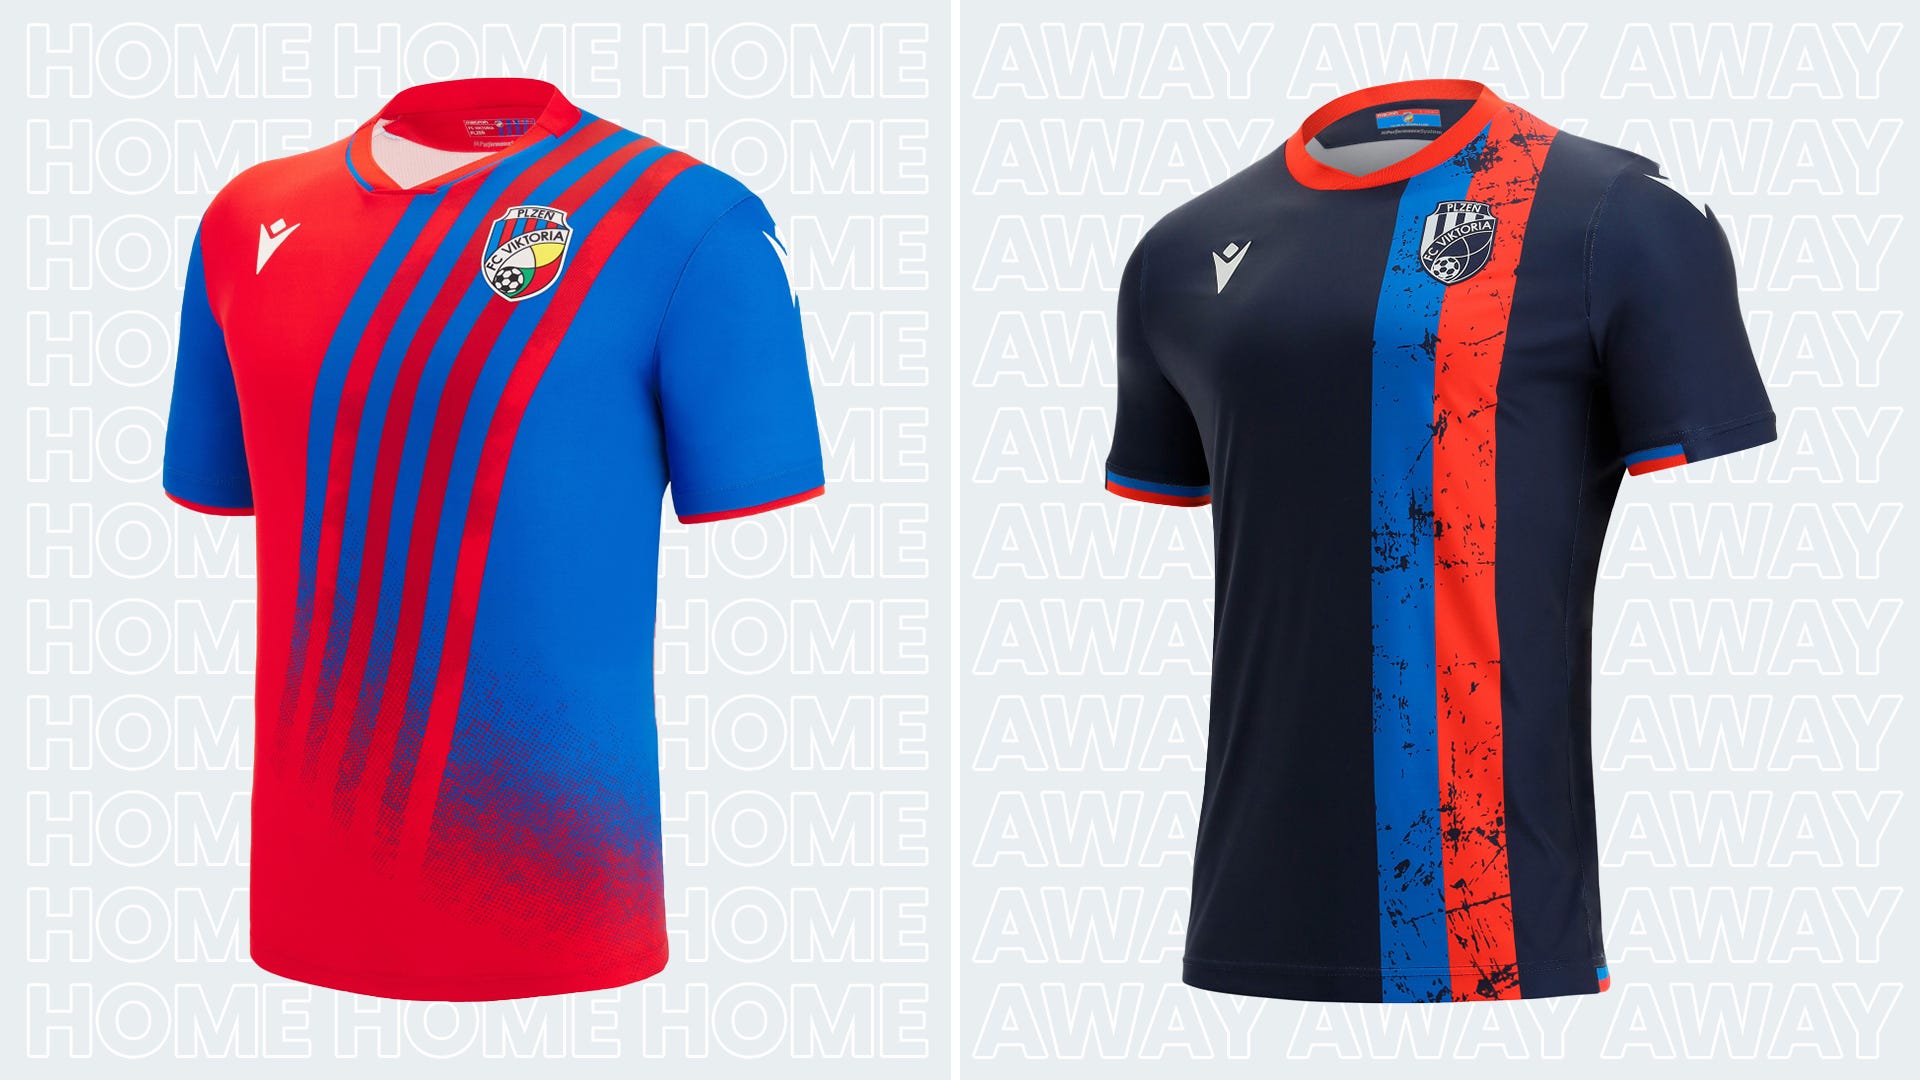 Bespoke Rangers Women 20-21 Home Kit Released - Can You Spot the